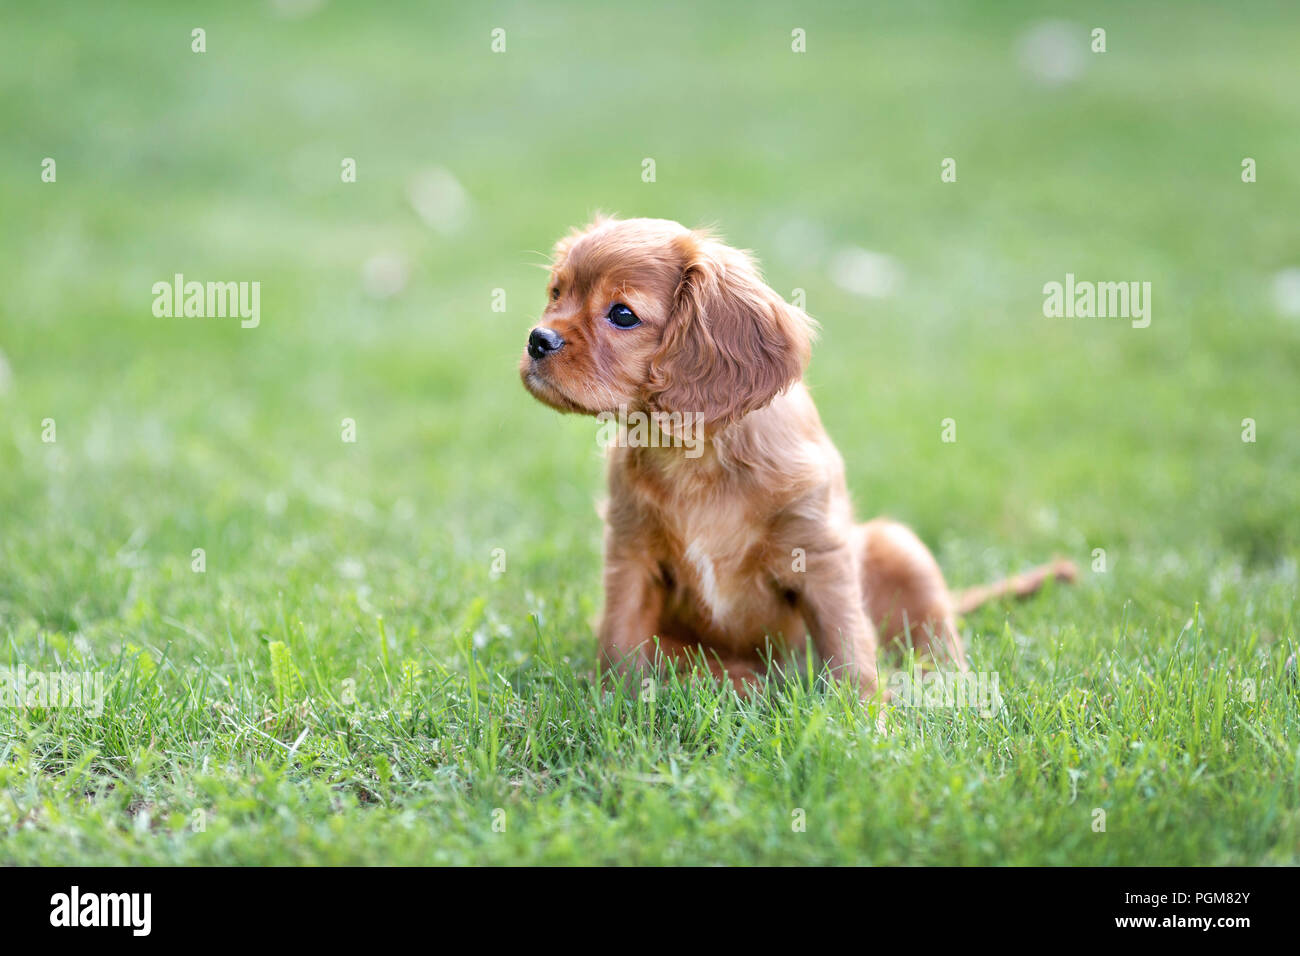 Adorable puppy sitting on the green grass Stock Photo